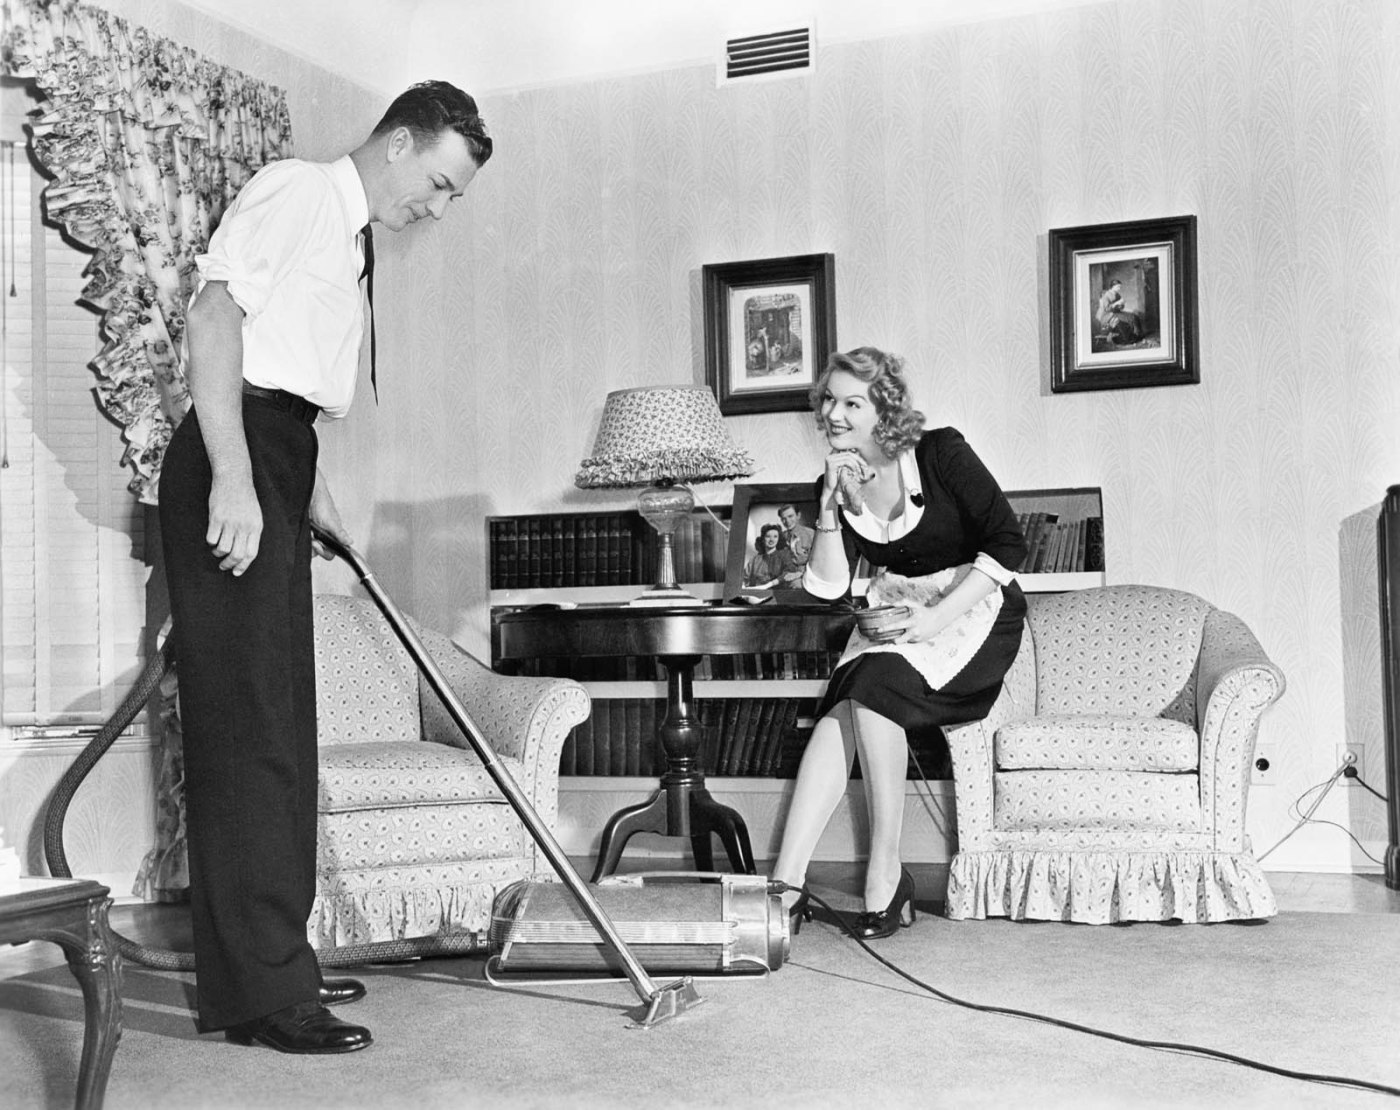 Photo of a 1950s style advertisement with a man vacuuming a living room floor while a woman watches from a chair.